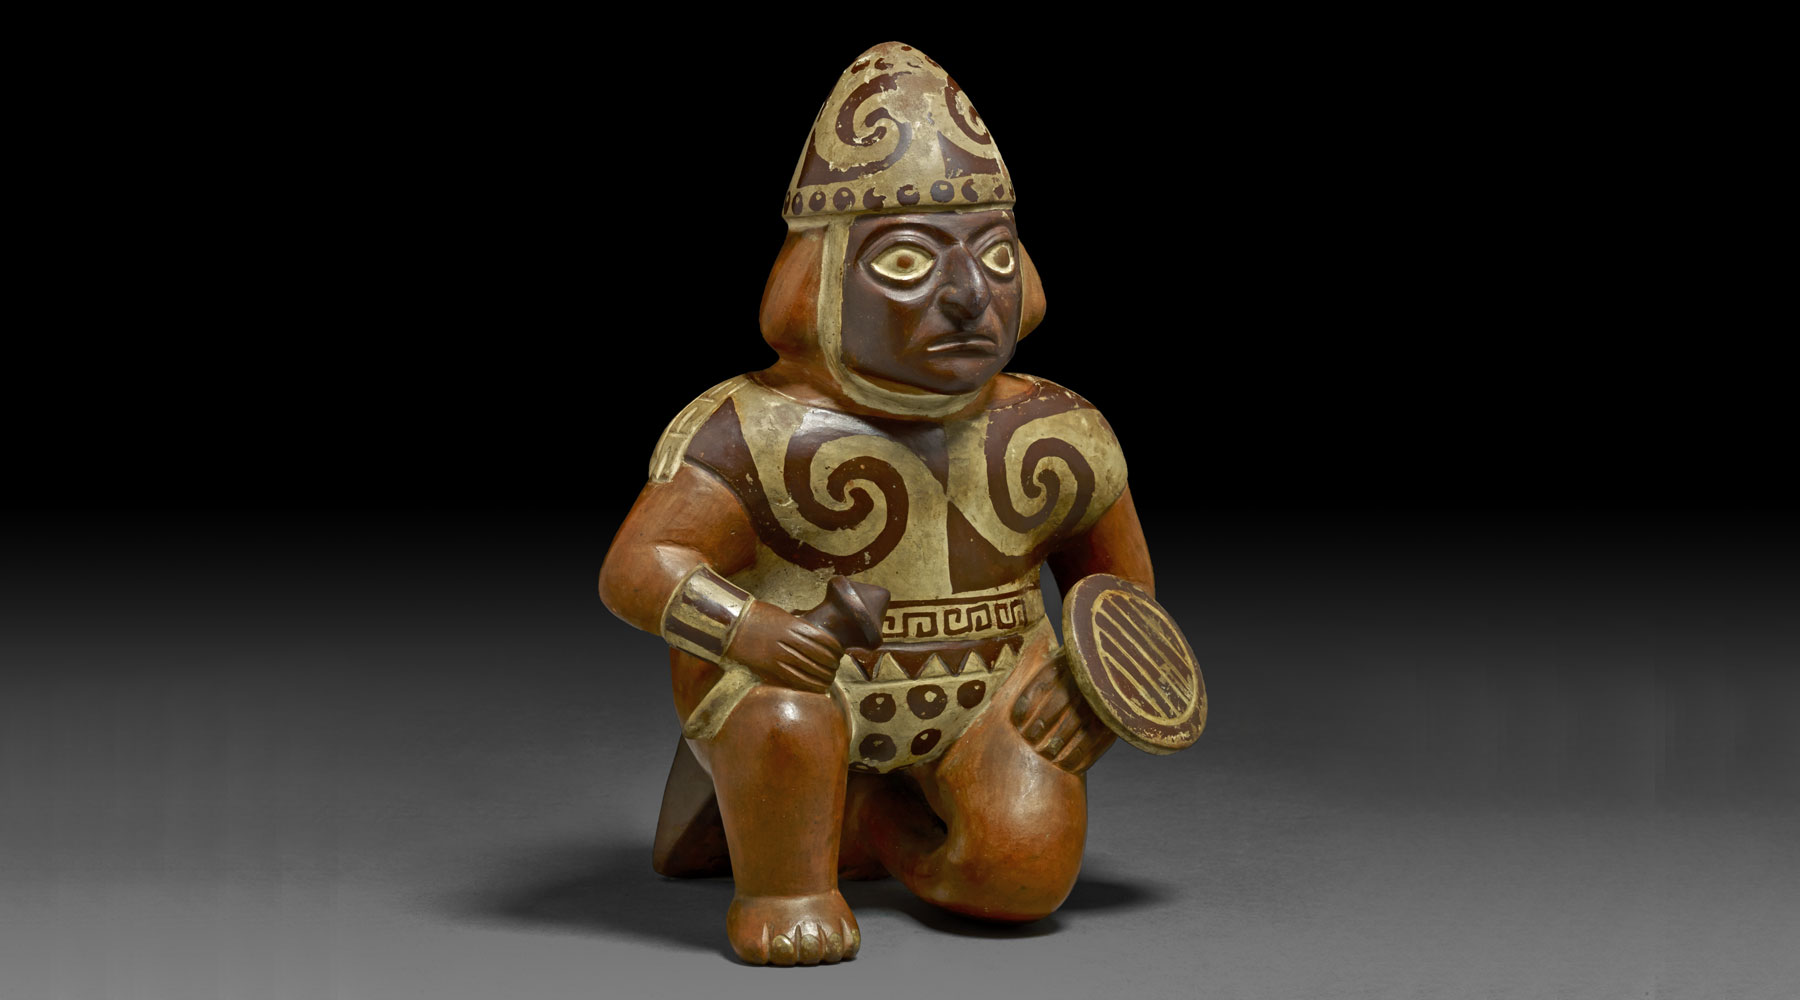 Treasures of Peru are coming to the British Museum